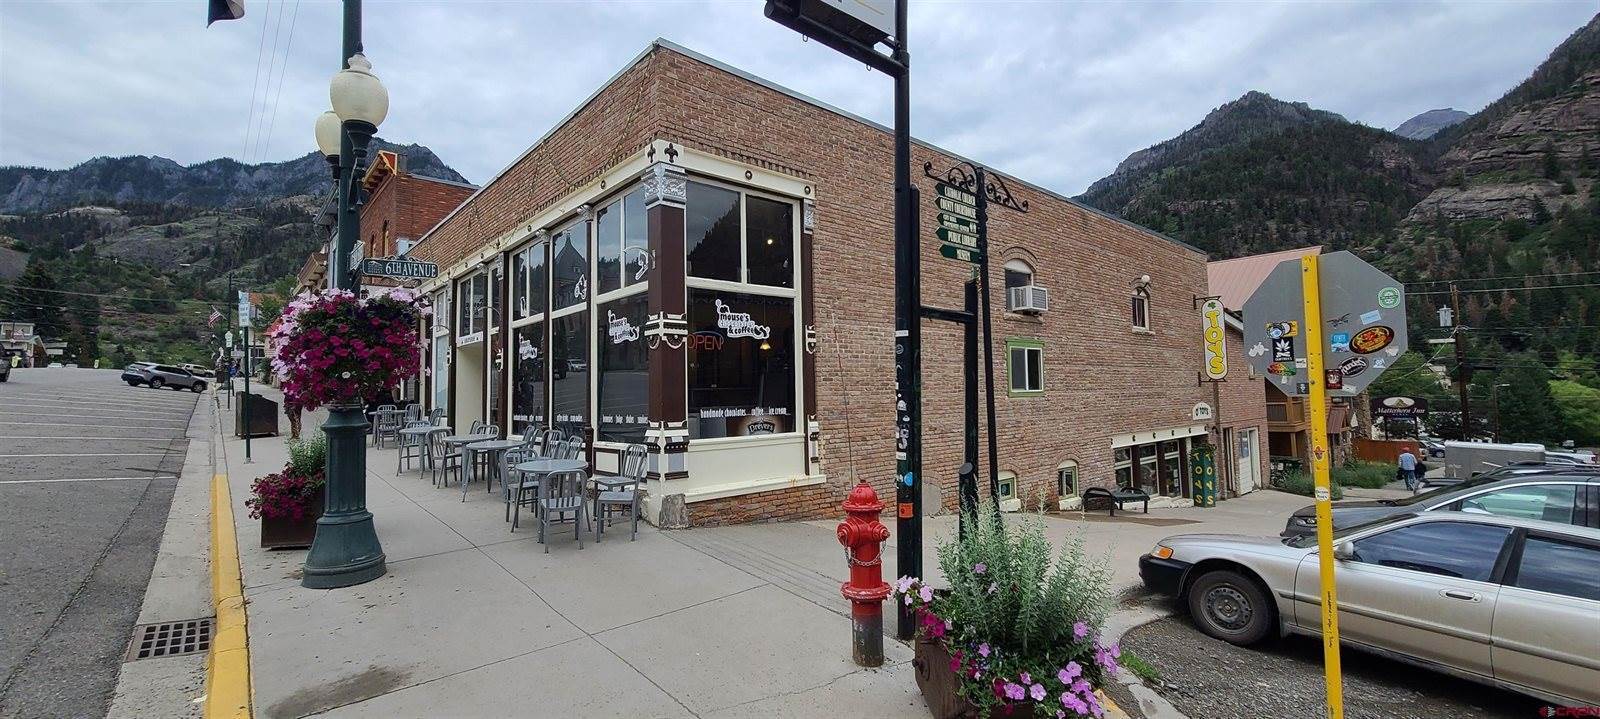 227 6th Avenue, Ouray, CO 81427